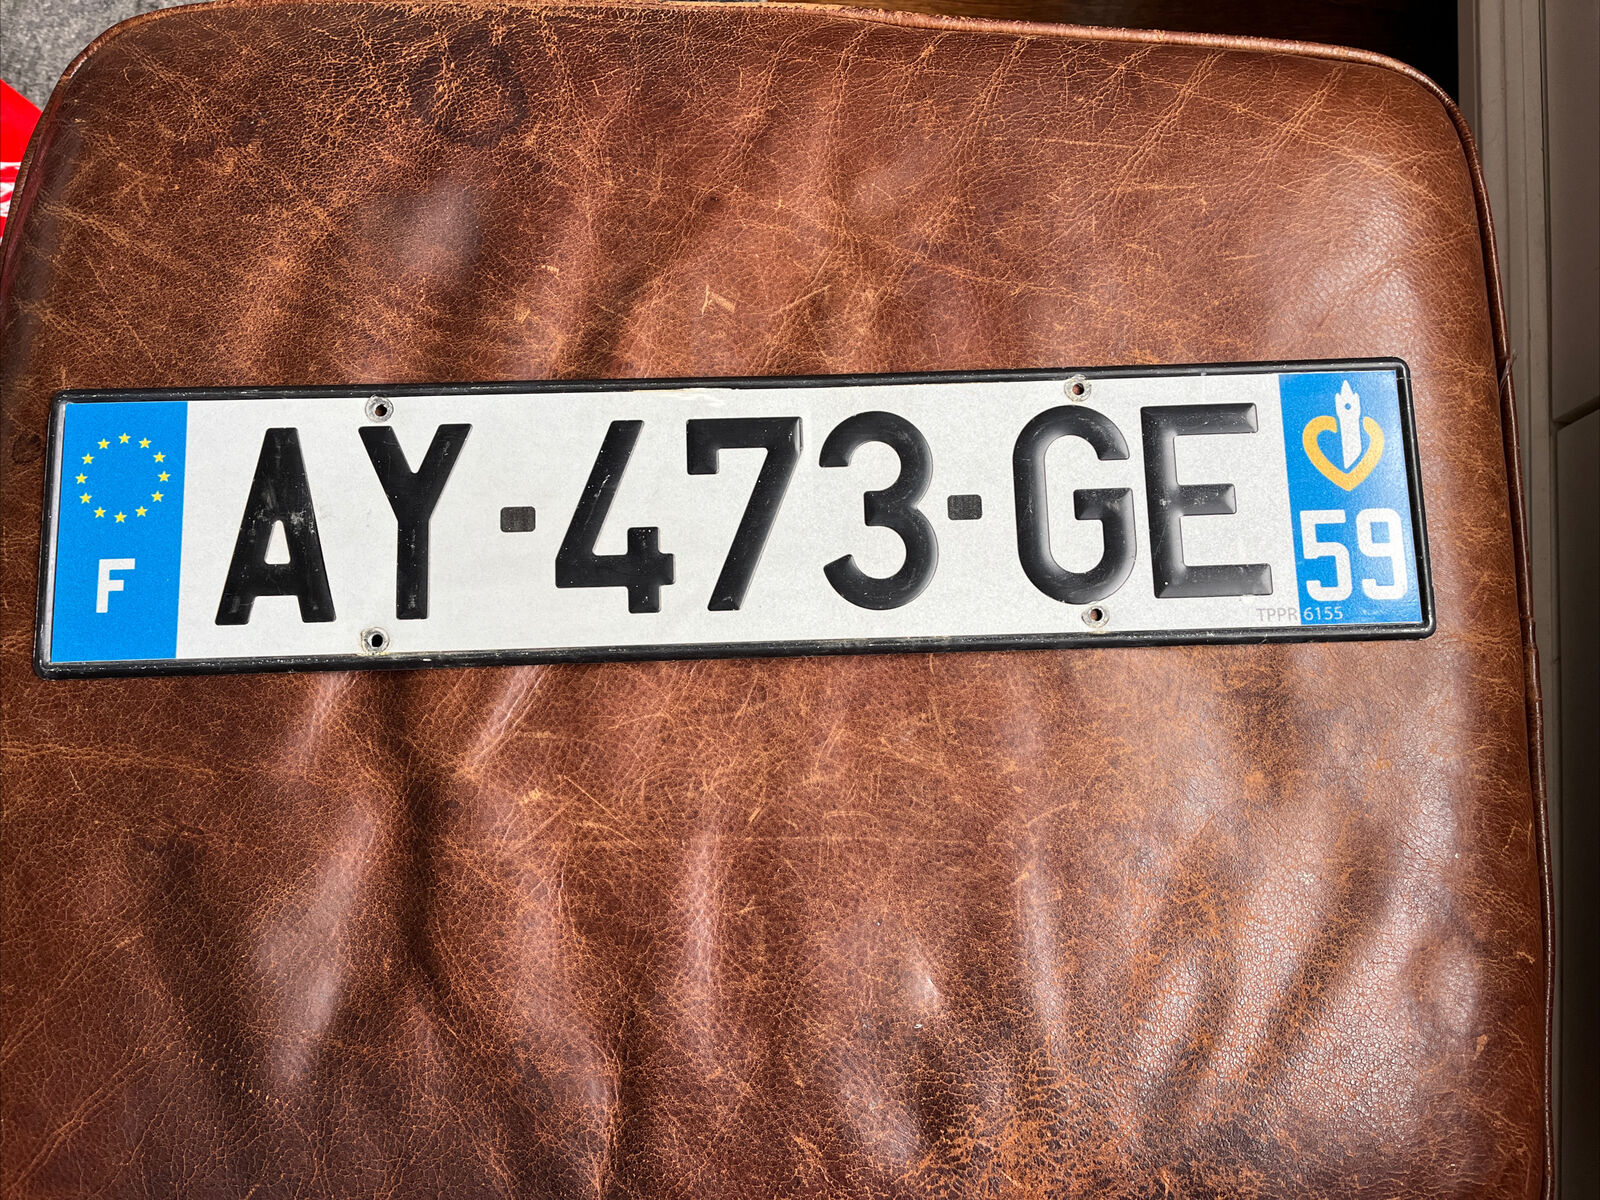 FRANCE 🇫🇷 LICENSE PLATE. French Tag Dept 59 Hauts-de-France # AY 473 GE